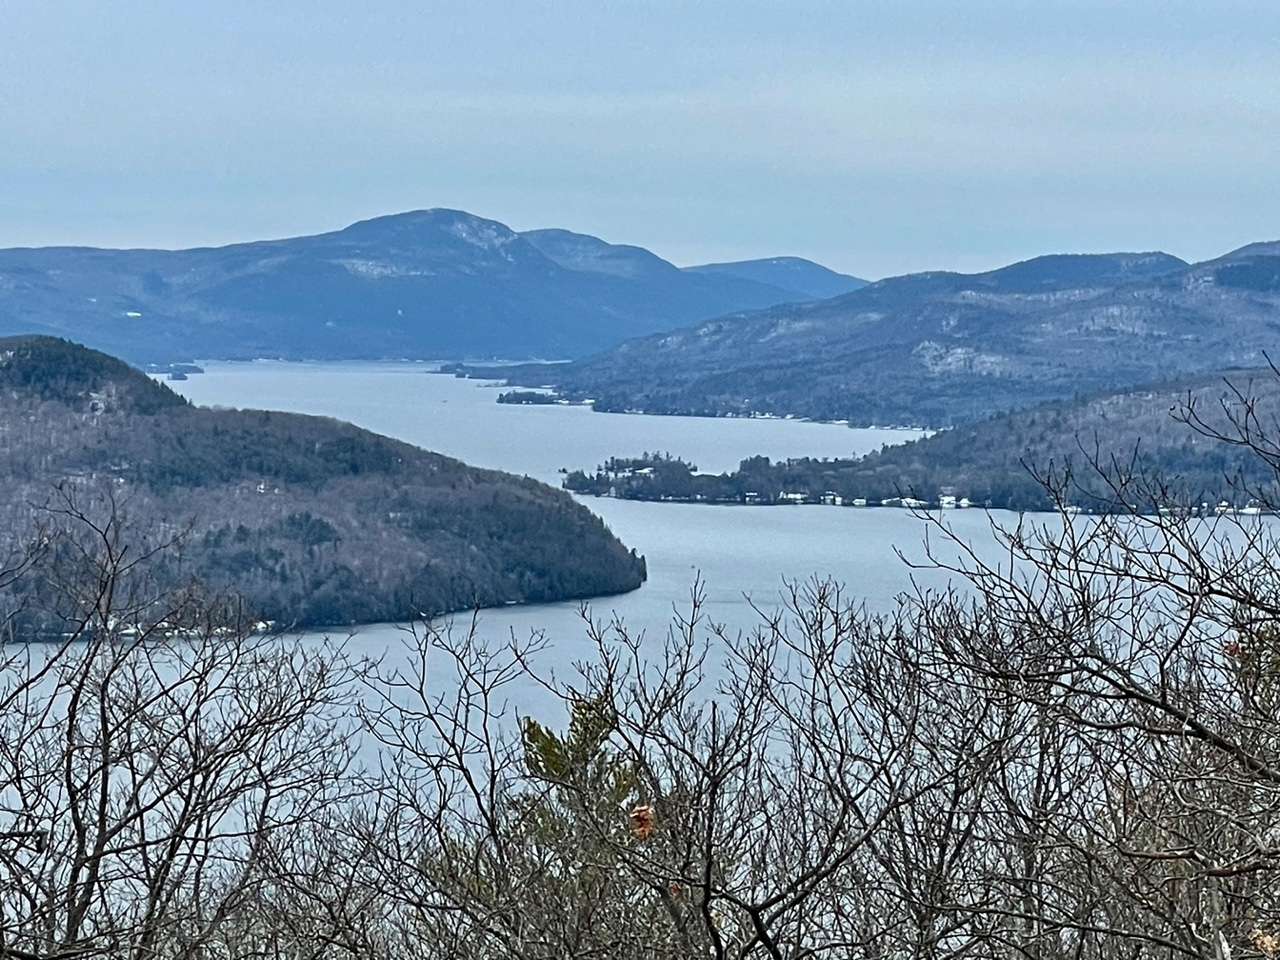 Lake George as seen from Cook Mountain trail’s “Lake View” spur.